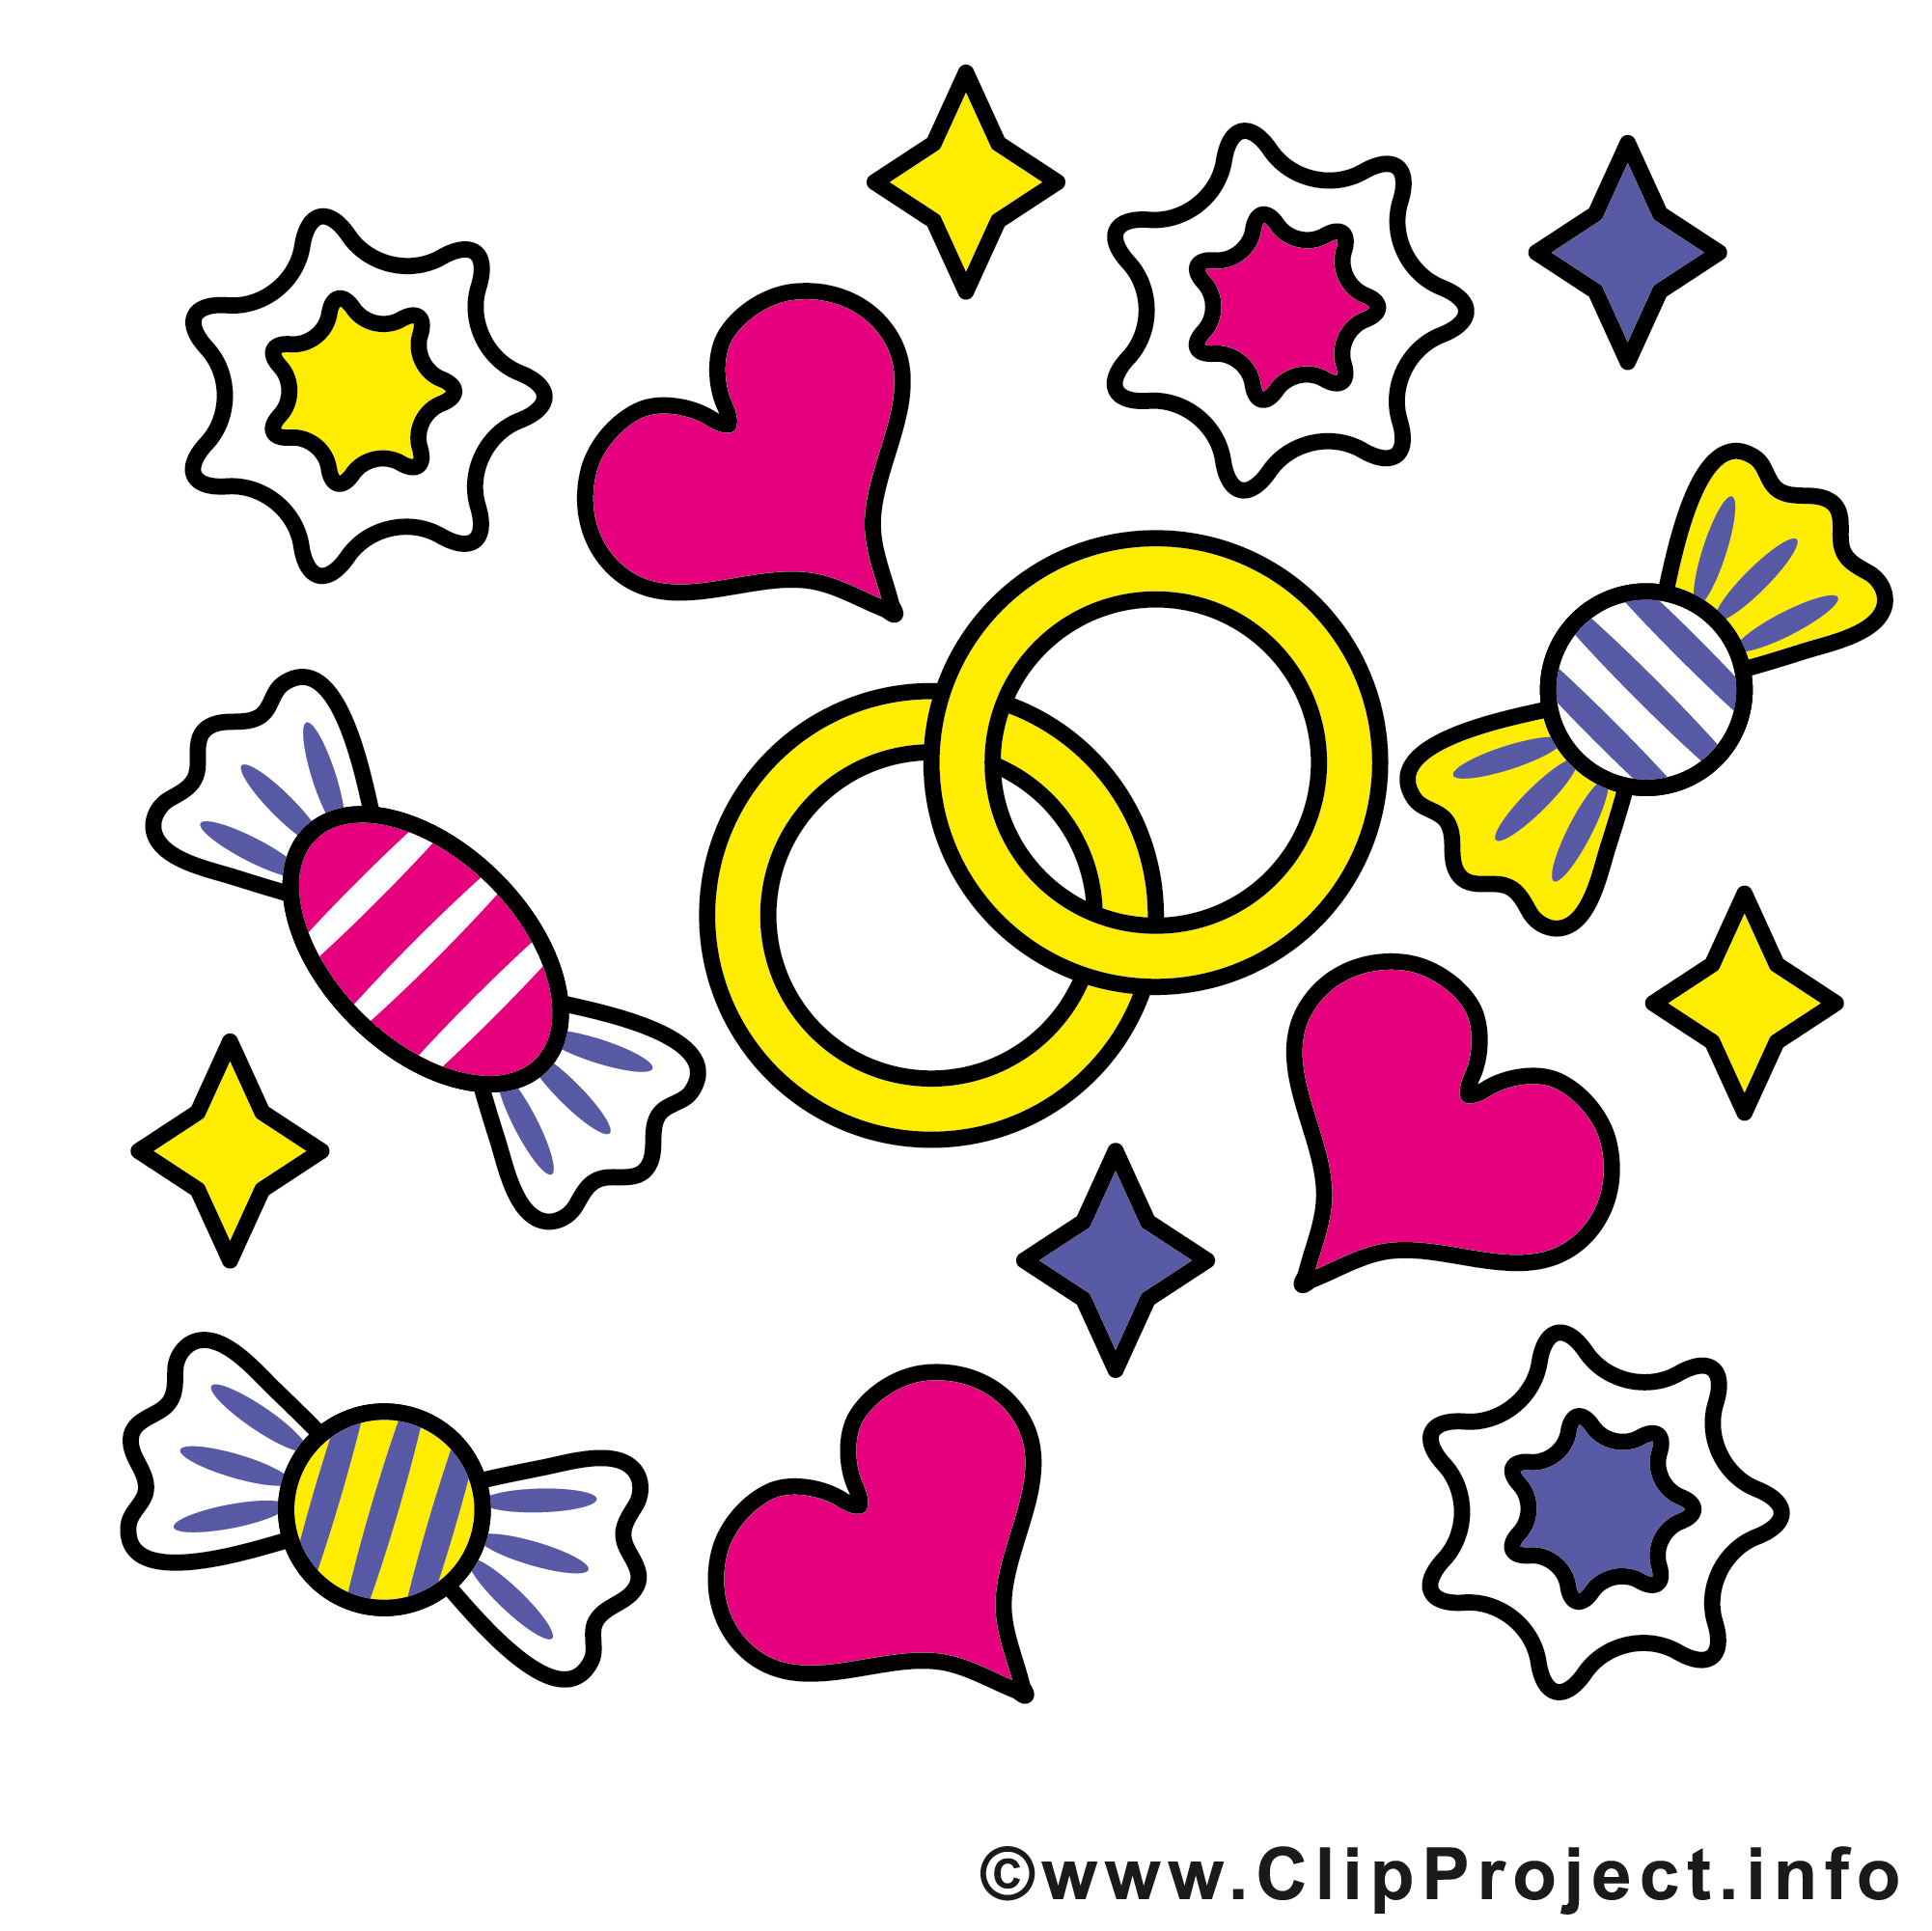 Bing Clipart Images - Clipart